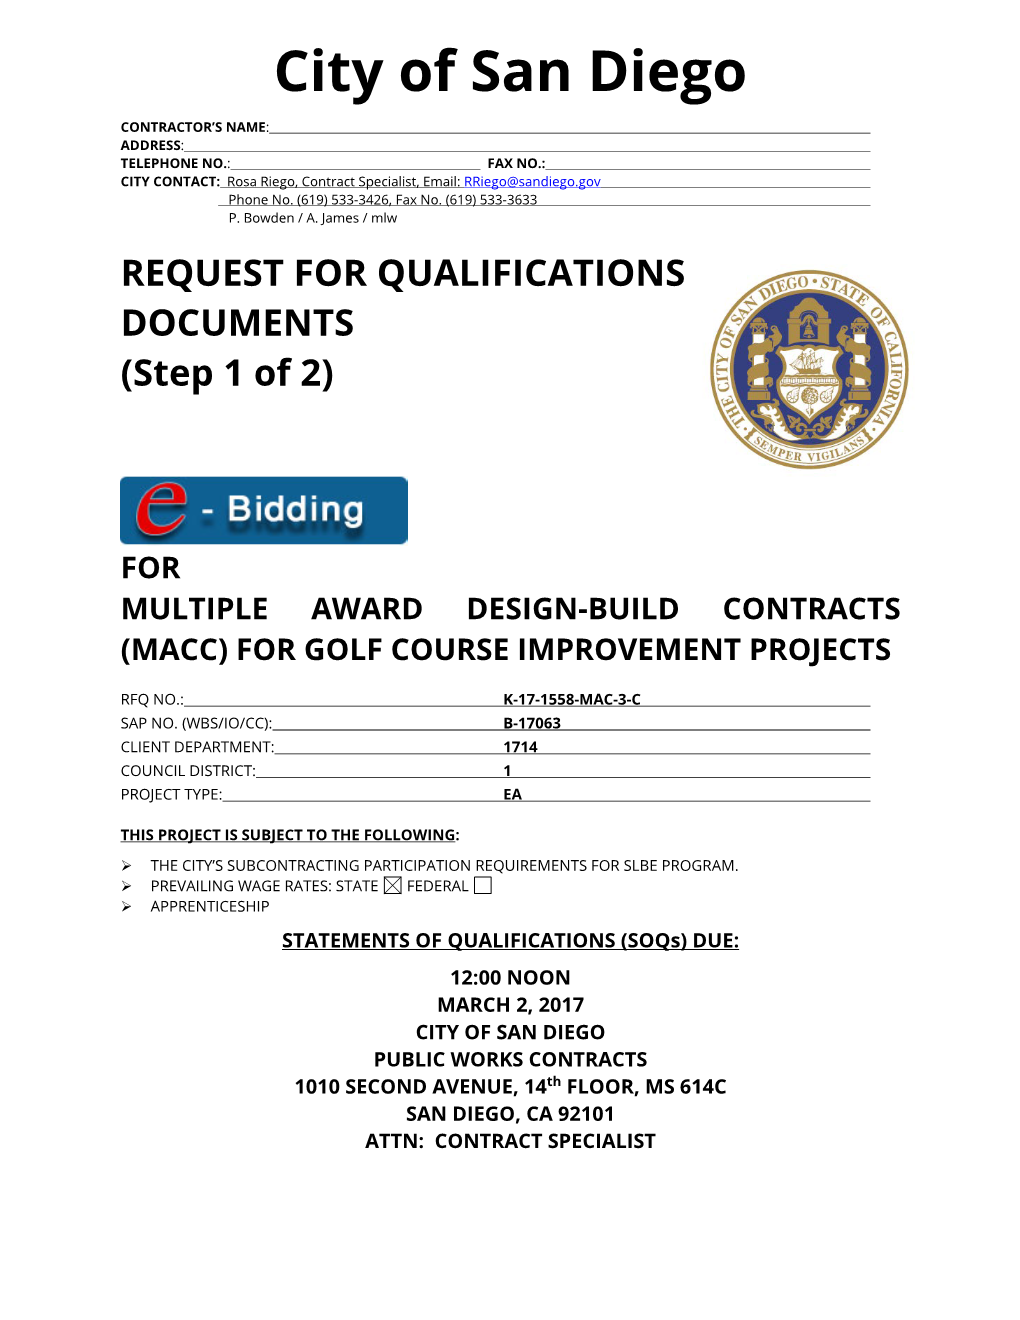 Multiple Award Design-Build Contracts for Golf Course Improvement Projects Table of Contents 1